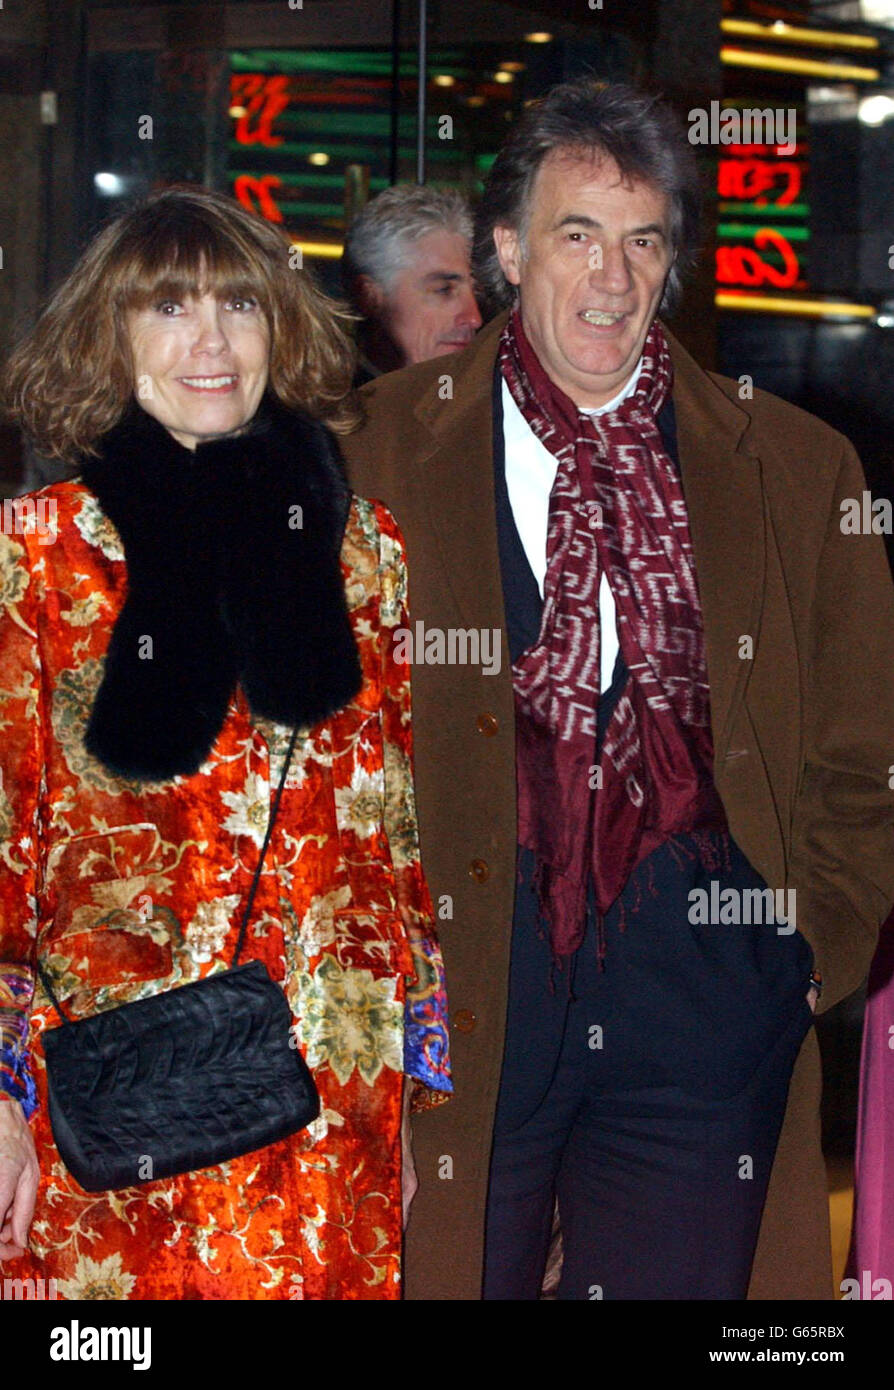 Fashion designer Paul Smith with his wife Pauline arrive at The Empire  Cinema, Leicester Square, London, for the UK premiere of Gangs of New York  Stock Photo - Alamy